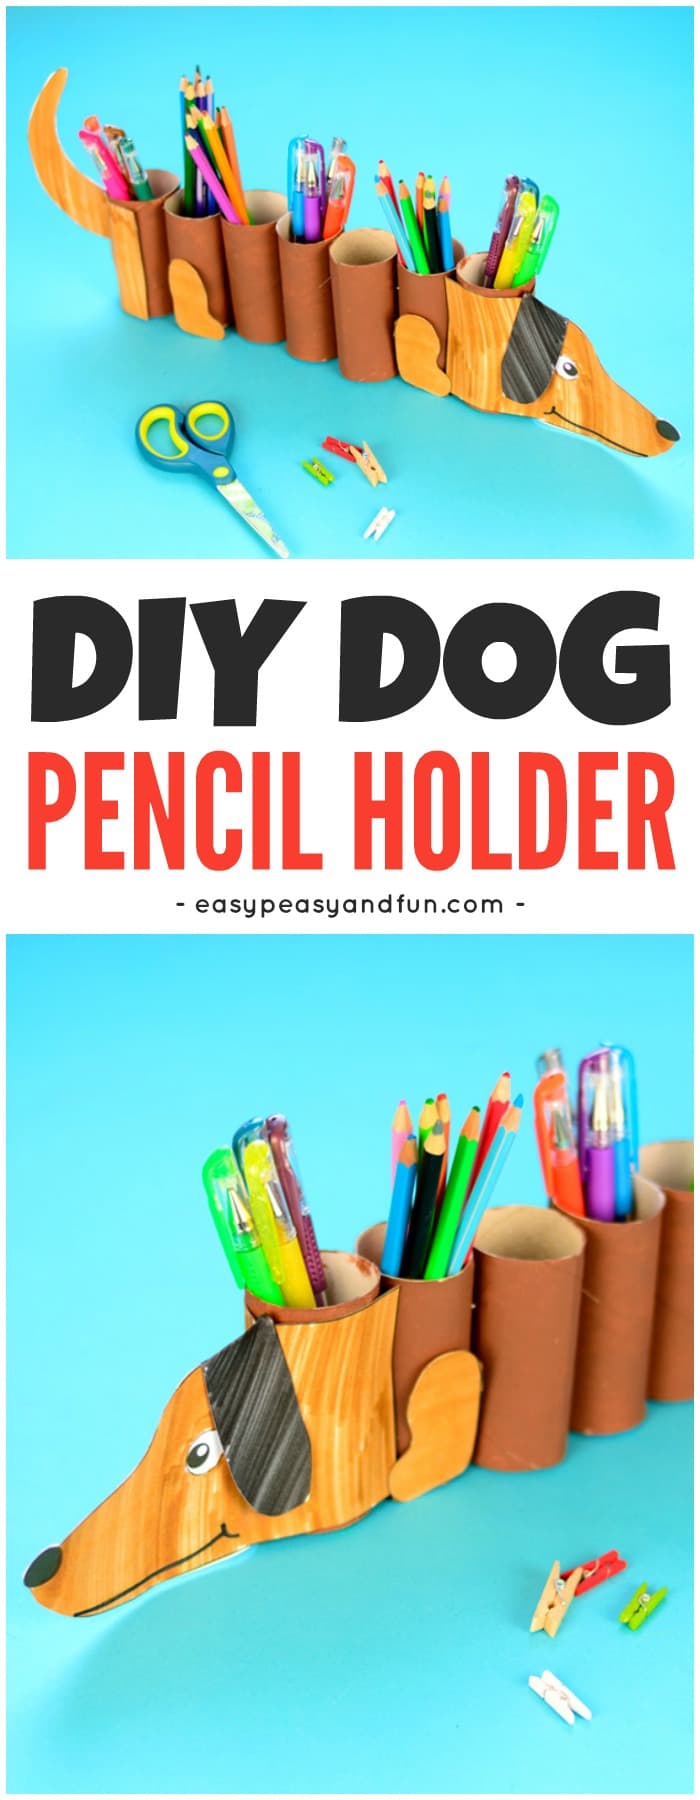 DIY Paper Roll Dog Pencil Holder Craft for Kids With Dog Template Included